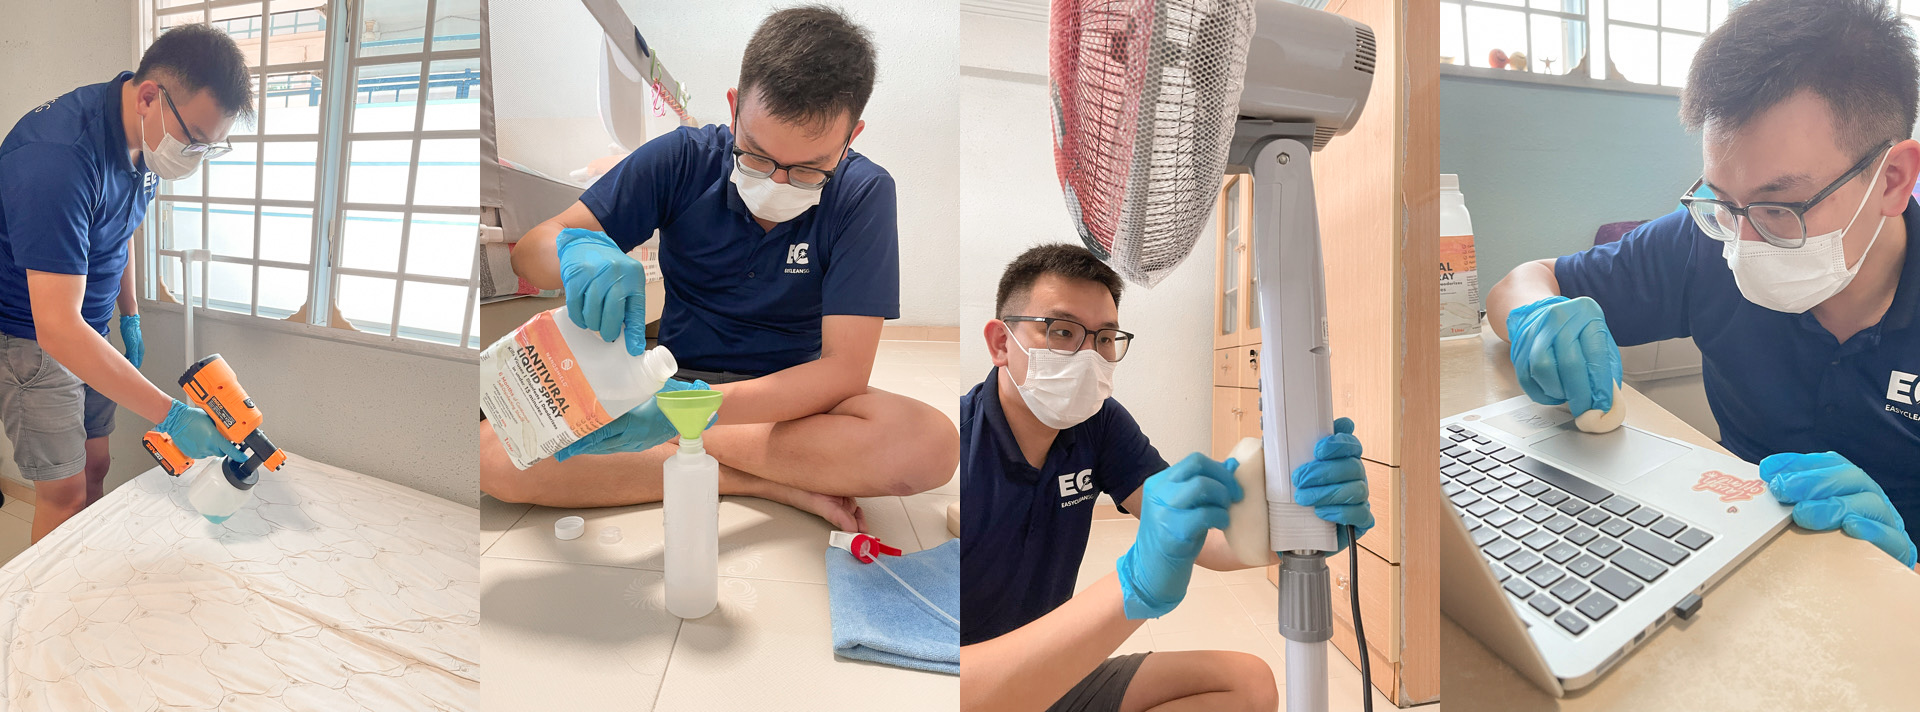 https://www.easycleansg.com/pages/self-disinfecting-coating